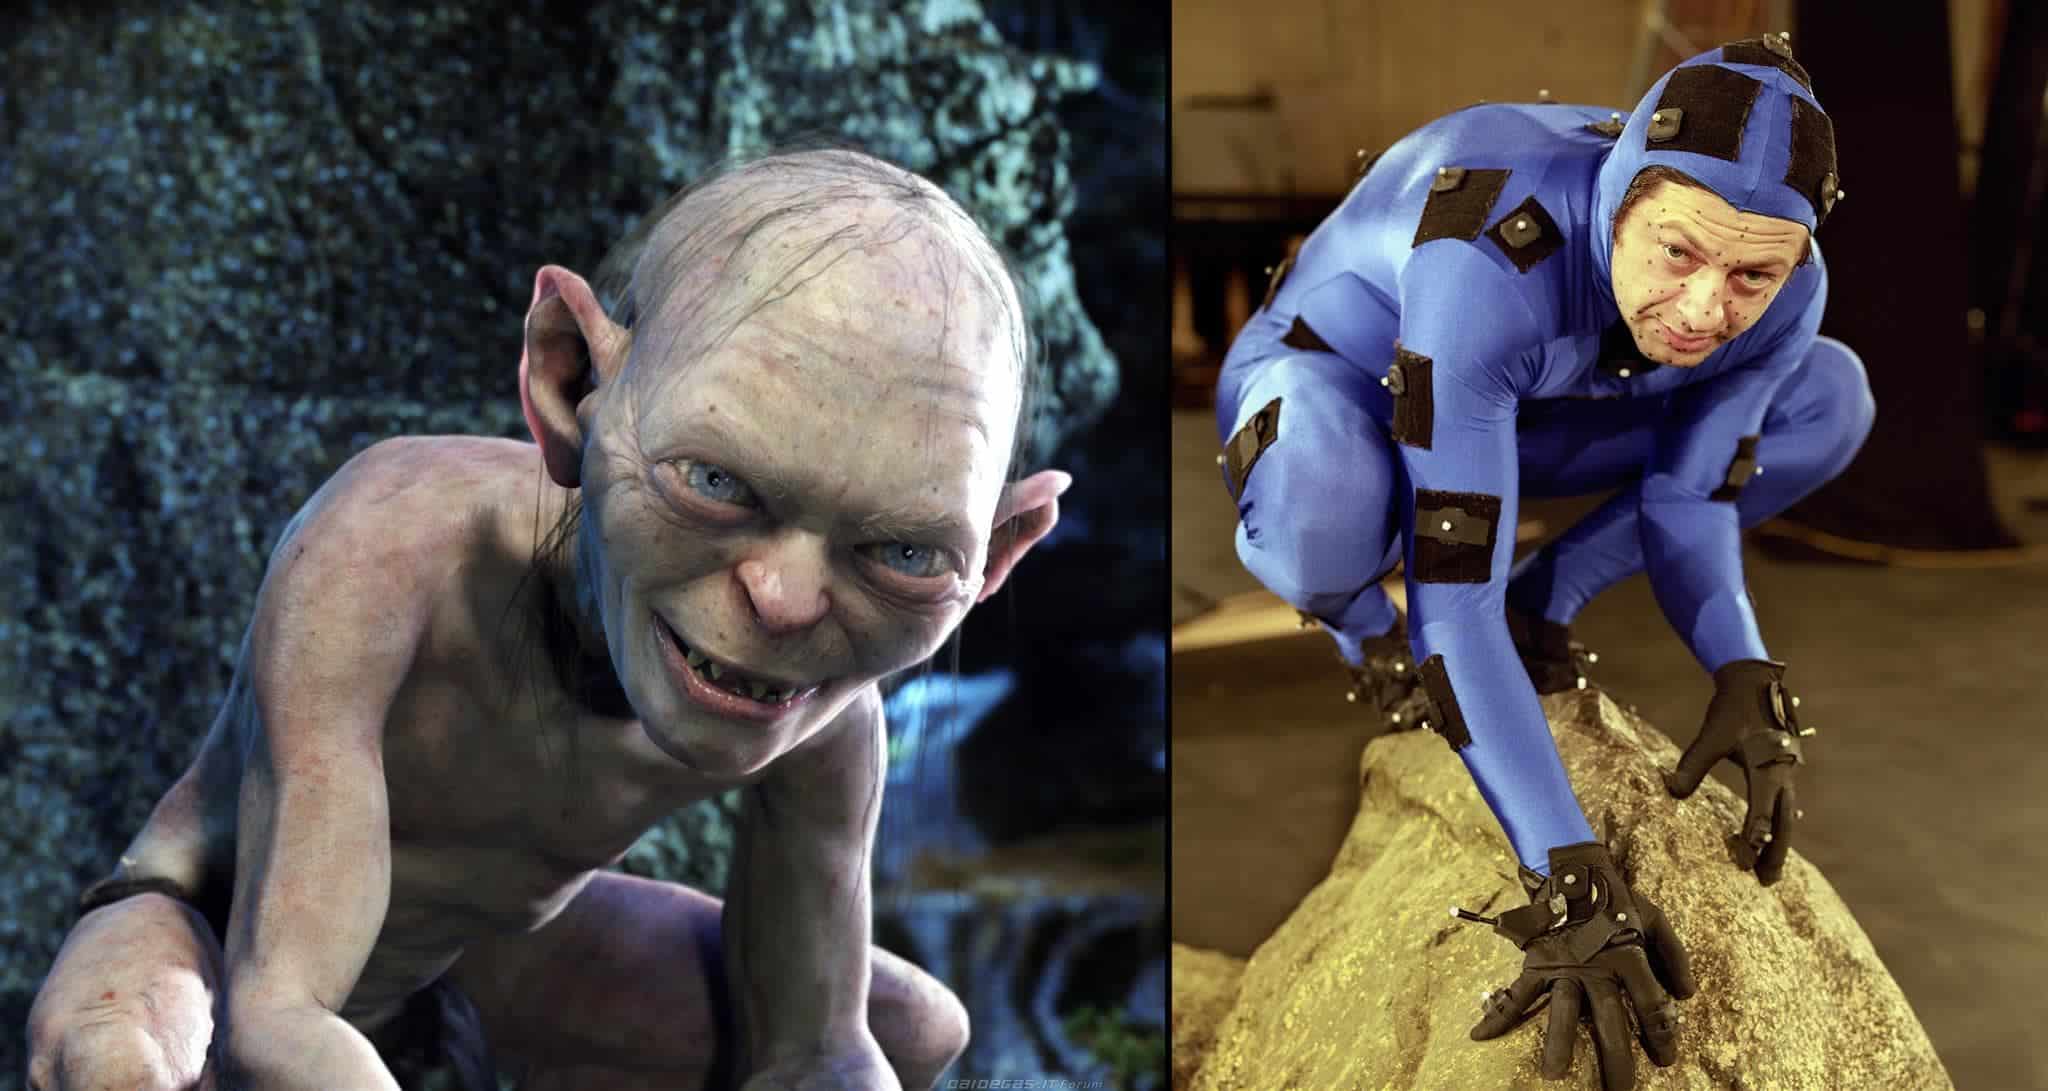 Lord-of-the-rings-gollum-motion-capture-reflective-markers